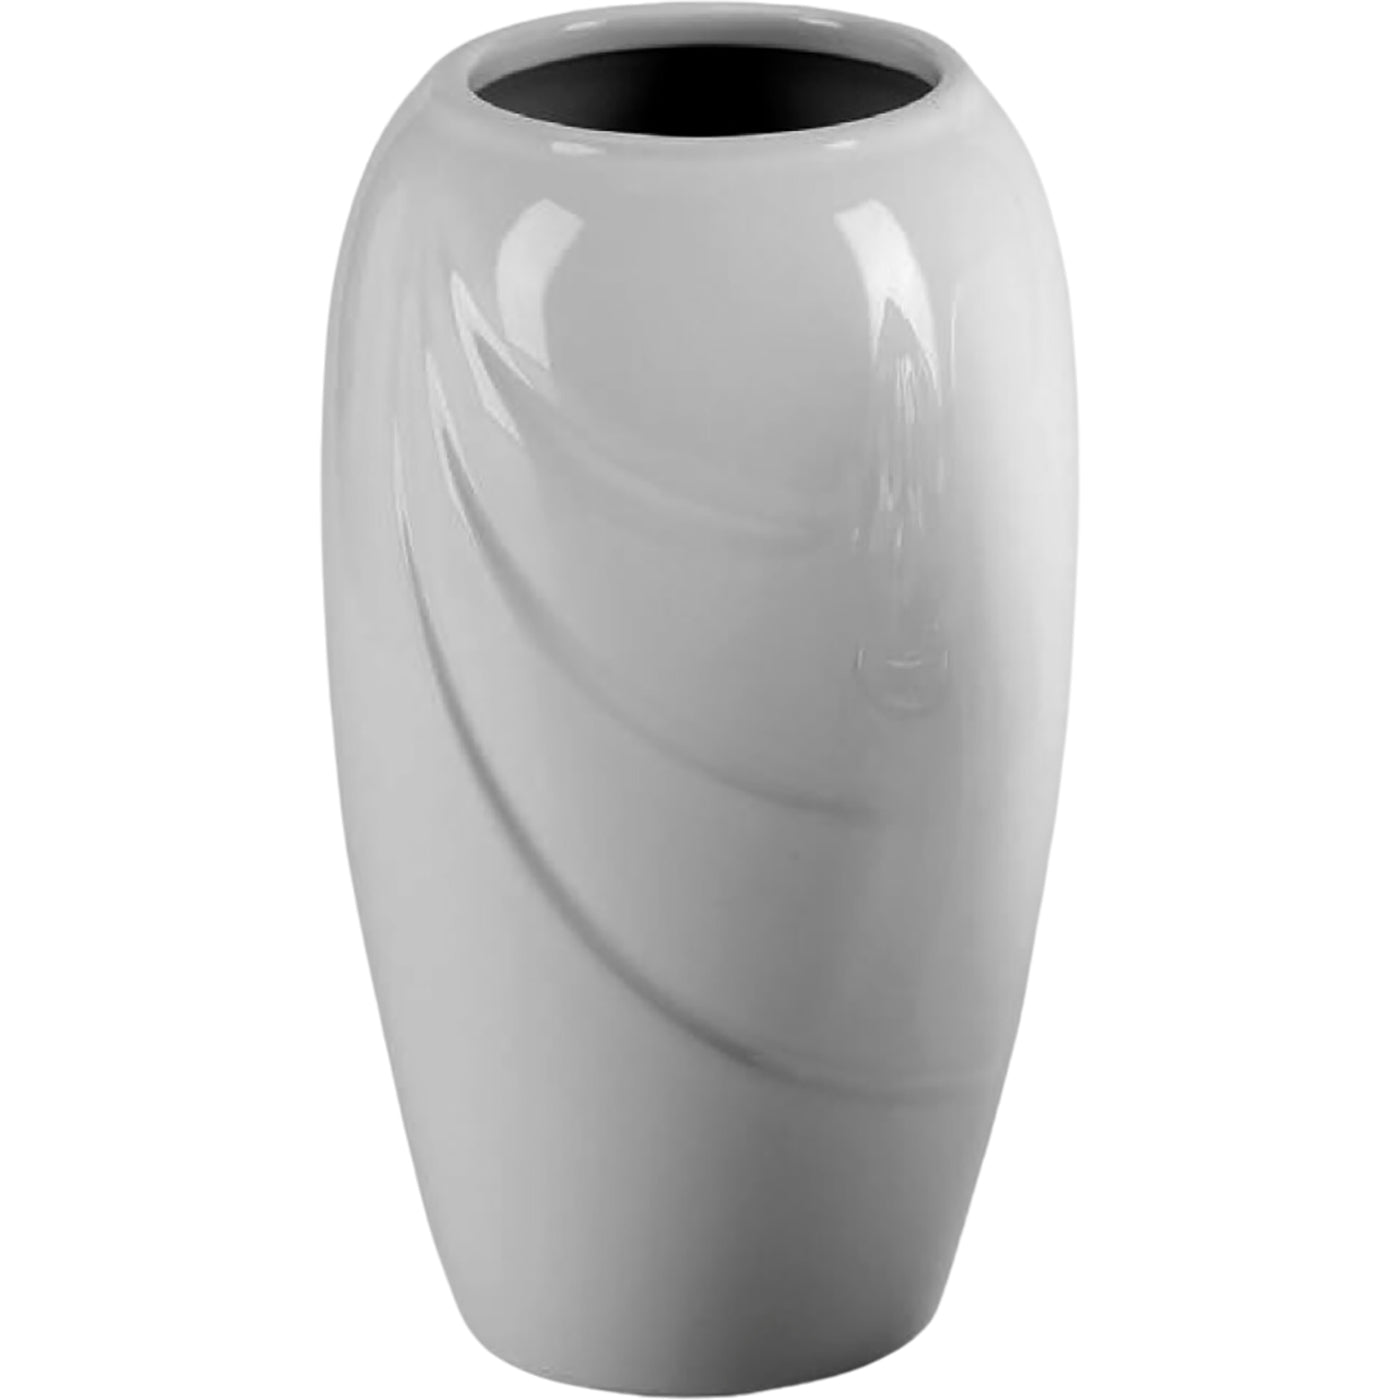 Grave vase Ecotre 21x13cm - 8.3x5.1in In white porcelain, wall attached ECO150T